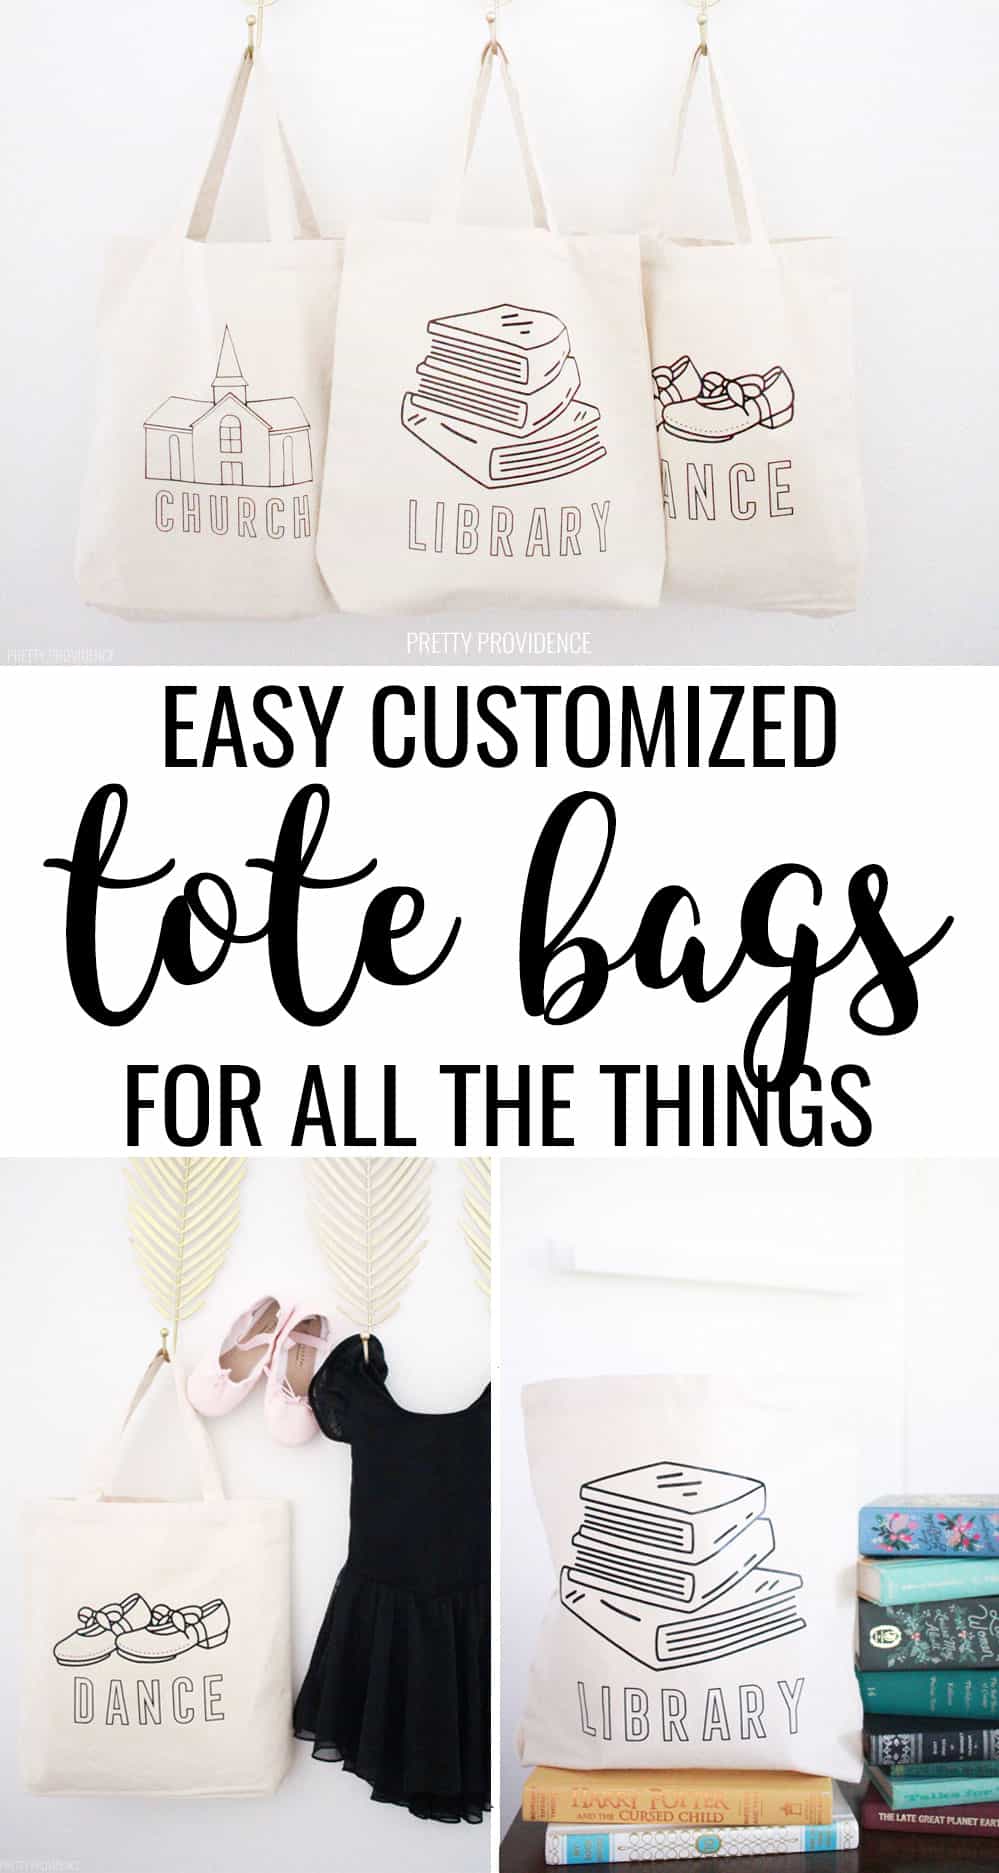 Customized Tote Bags to Organize All the Things